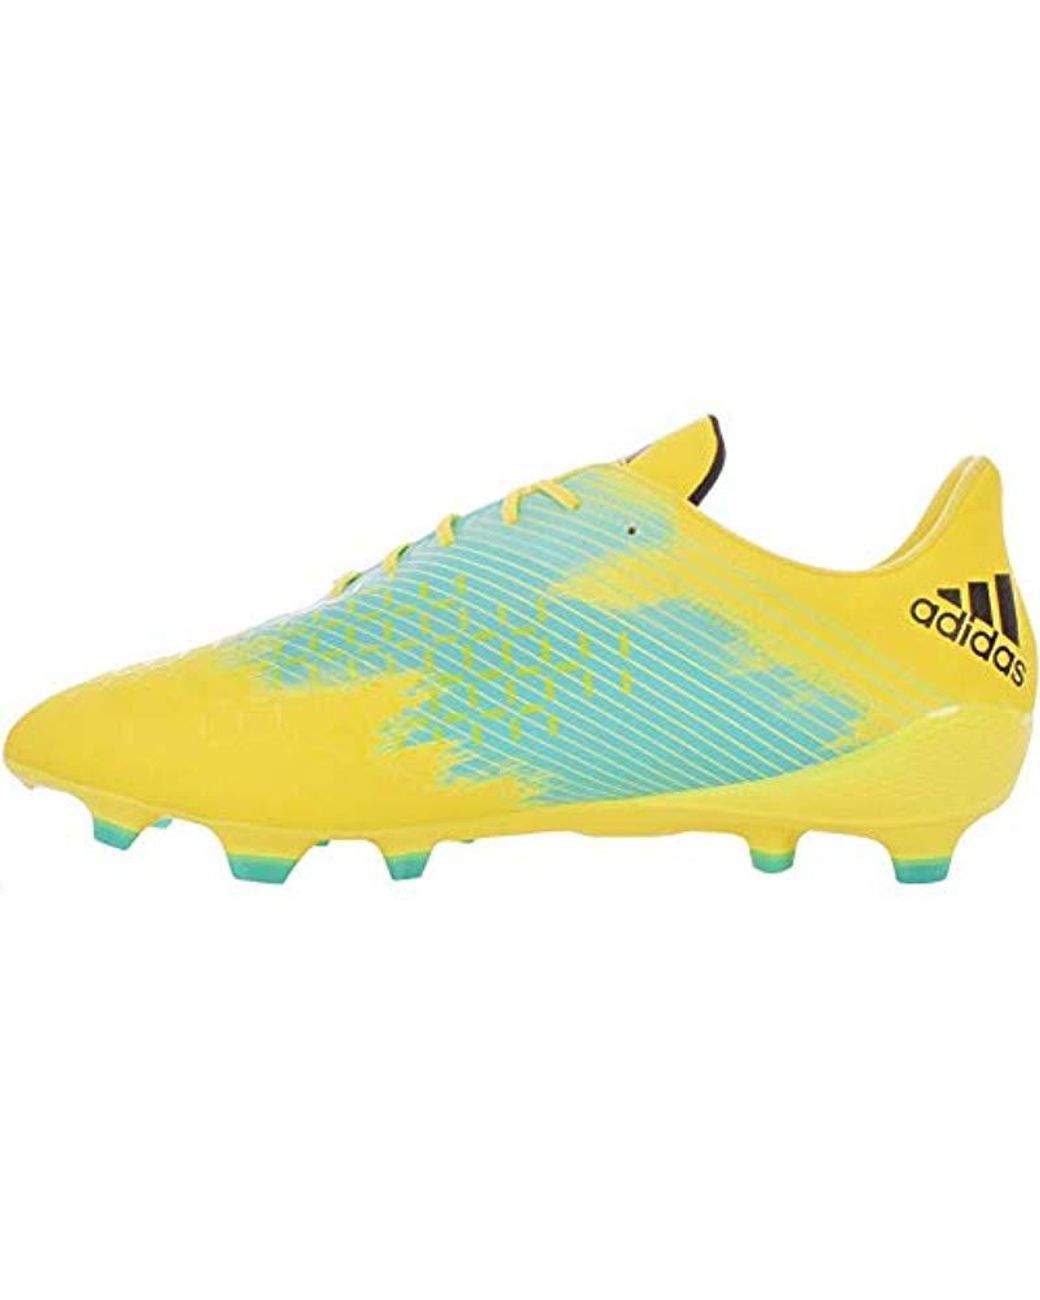 Adidas Lace Performance S Predator Malice Control Fg Rugby Shoe